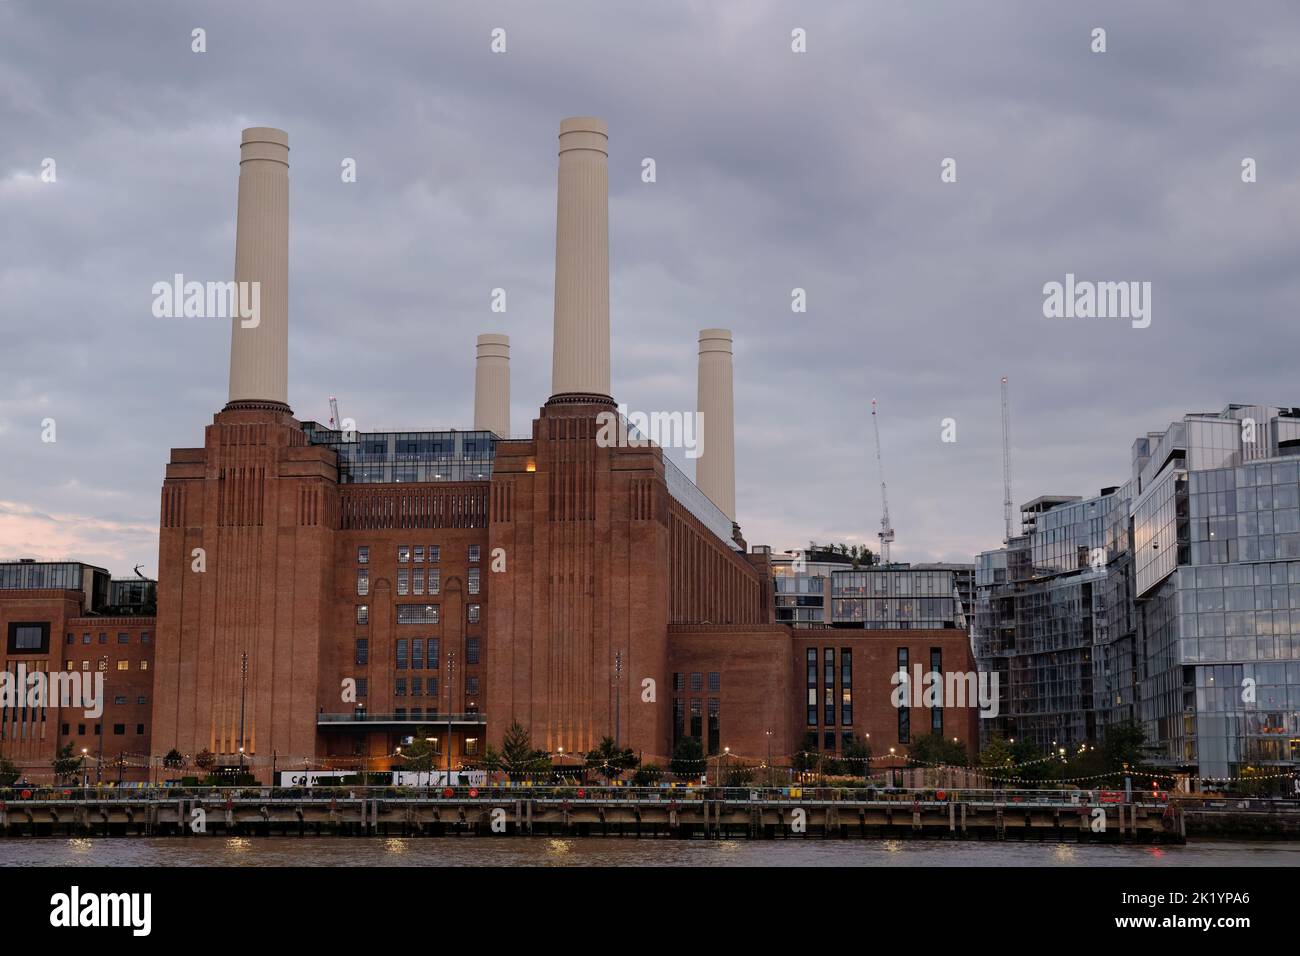 View of Battersea Power Station from the north side of the River Thames in London at dusk Stock Photo